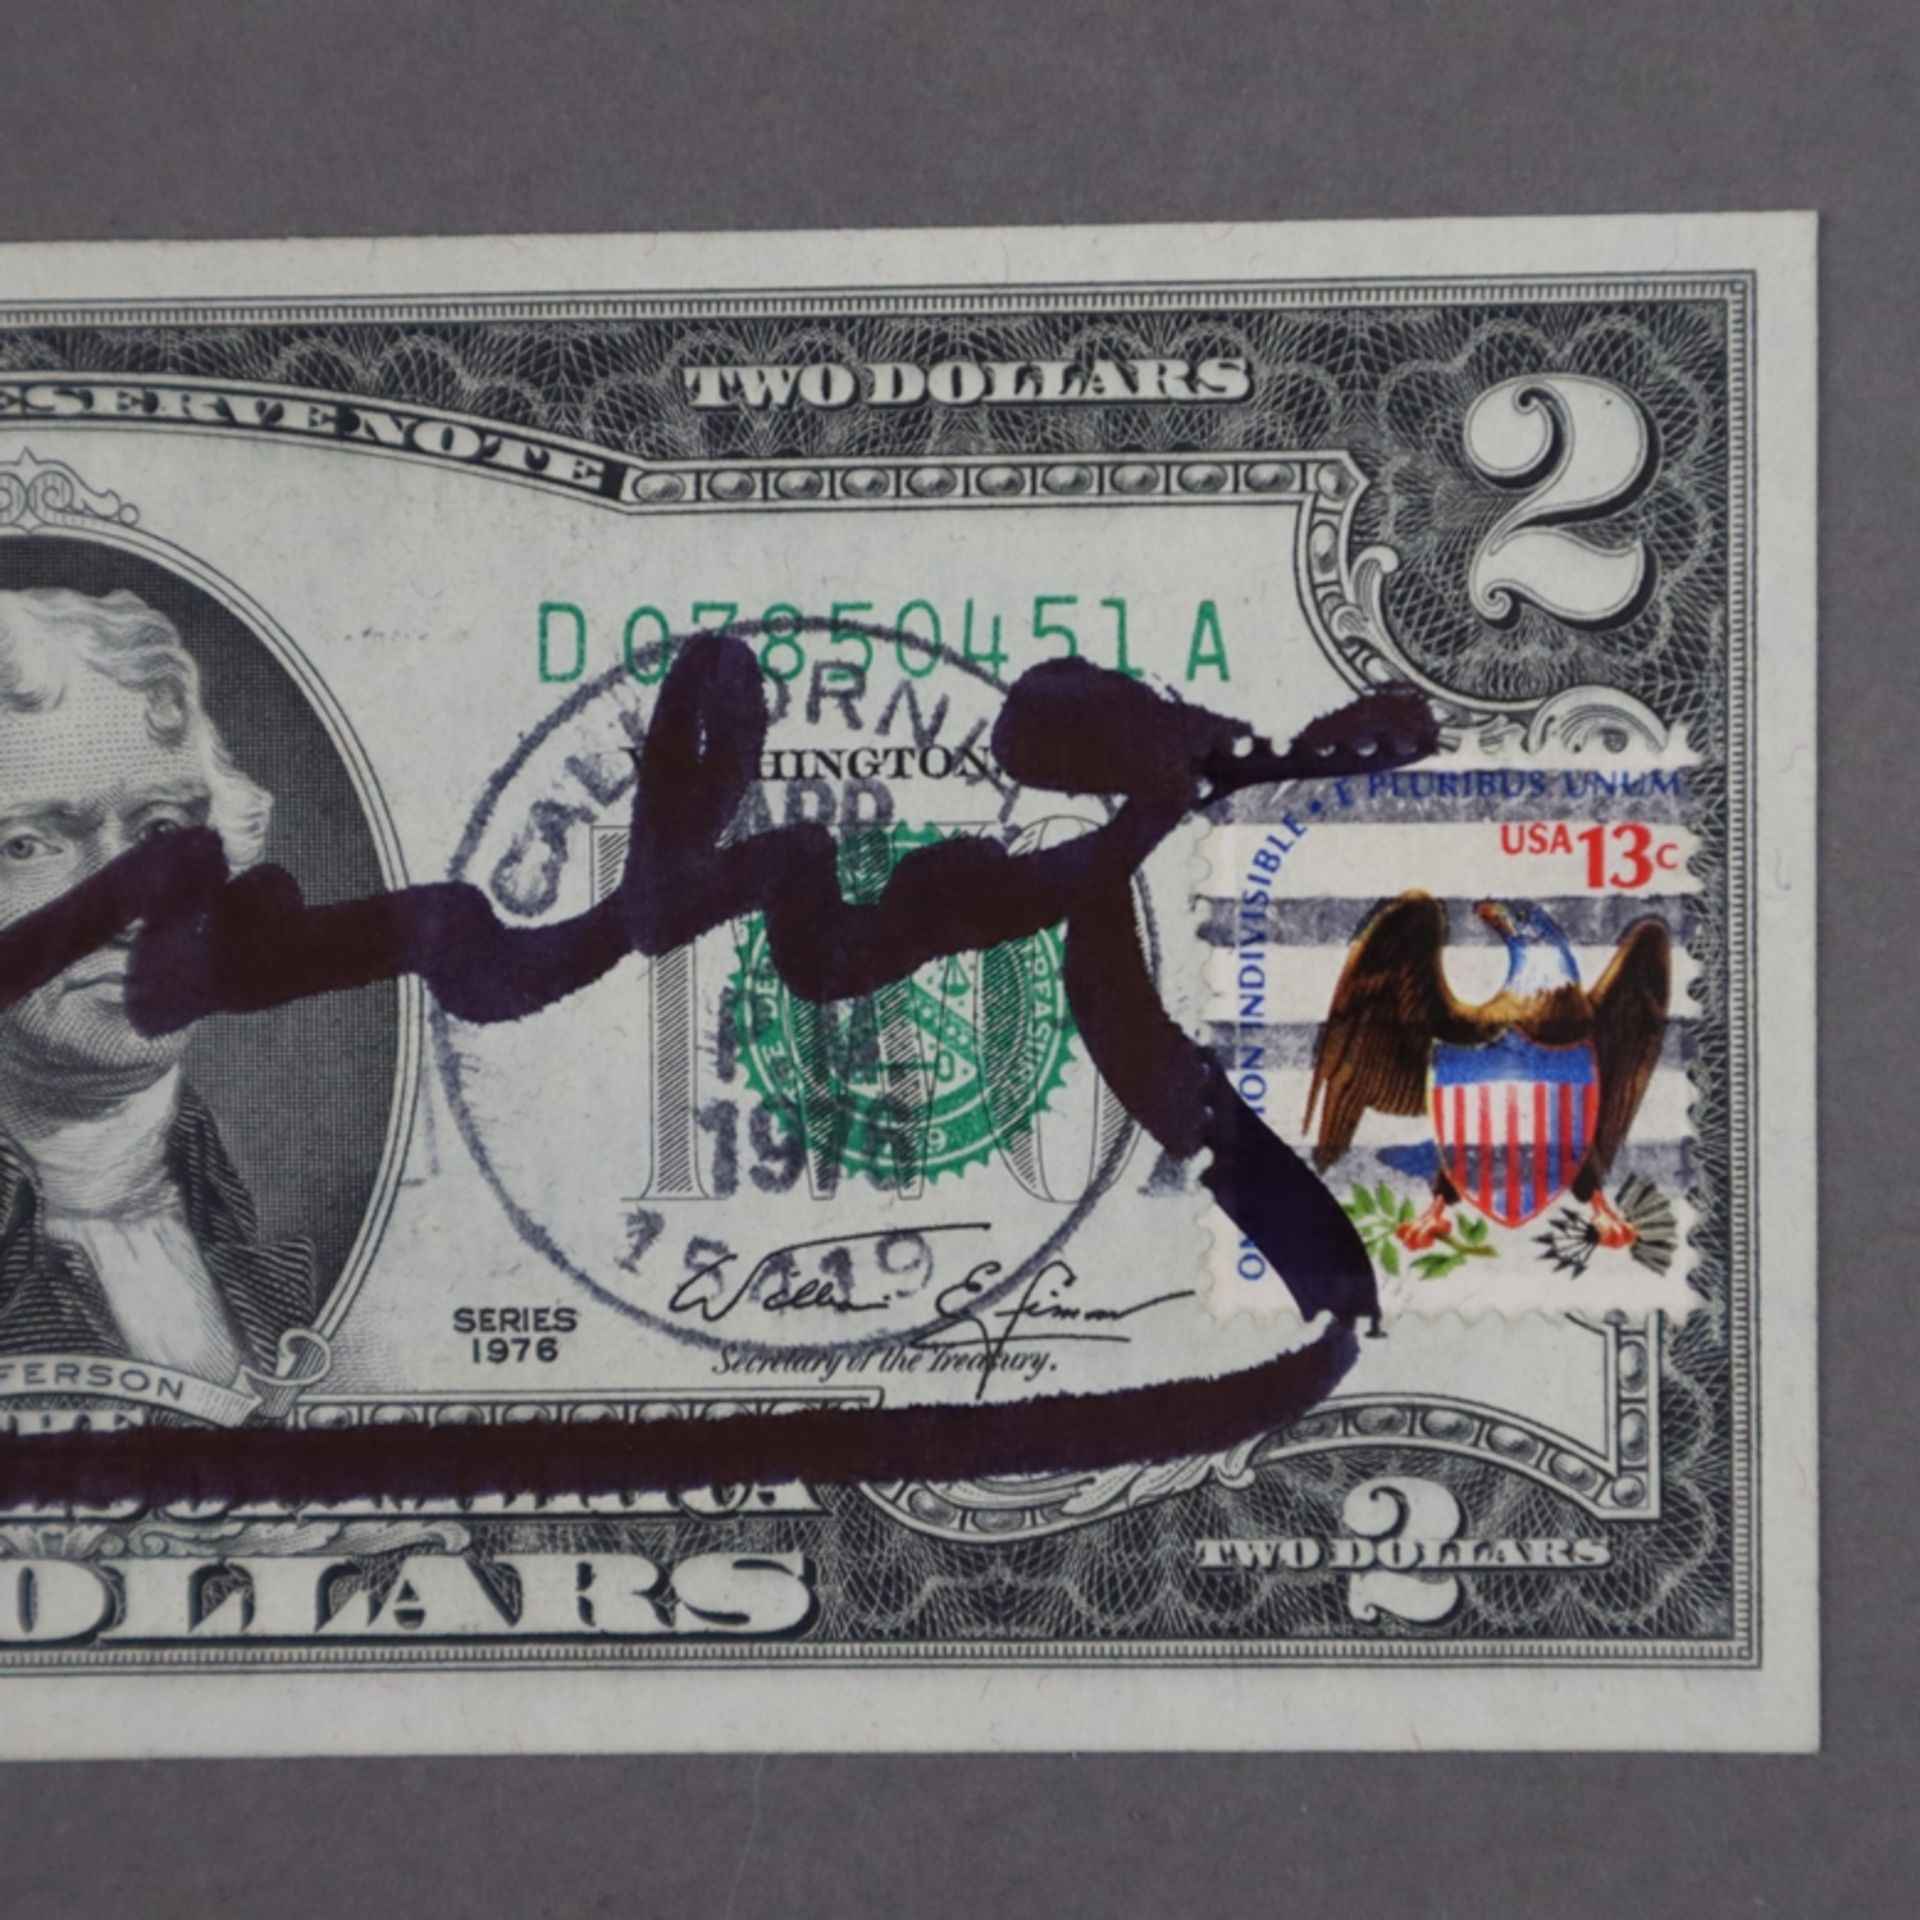 Warhol, Andy (1928 Pittsburgh - 1987 New York) - „Two Jefferson's Dollars“, 2 Dollarnote mit Signat - Image 3 of 5